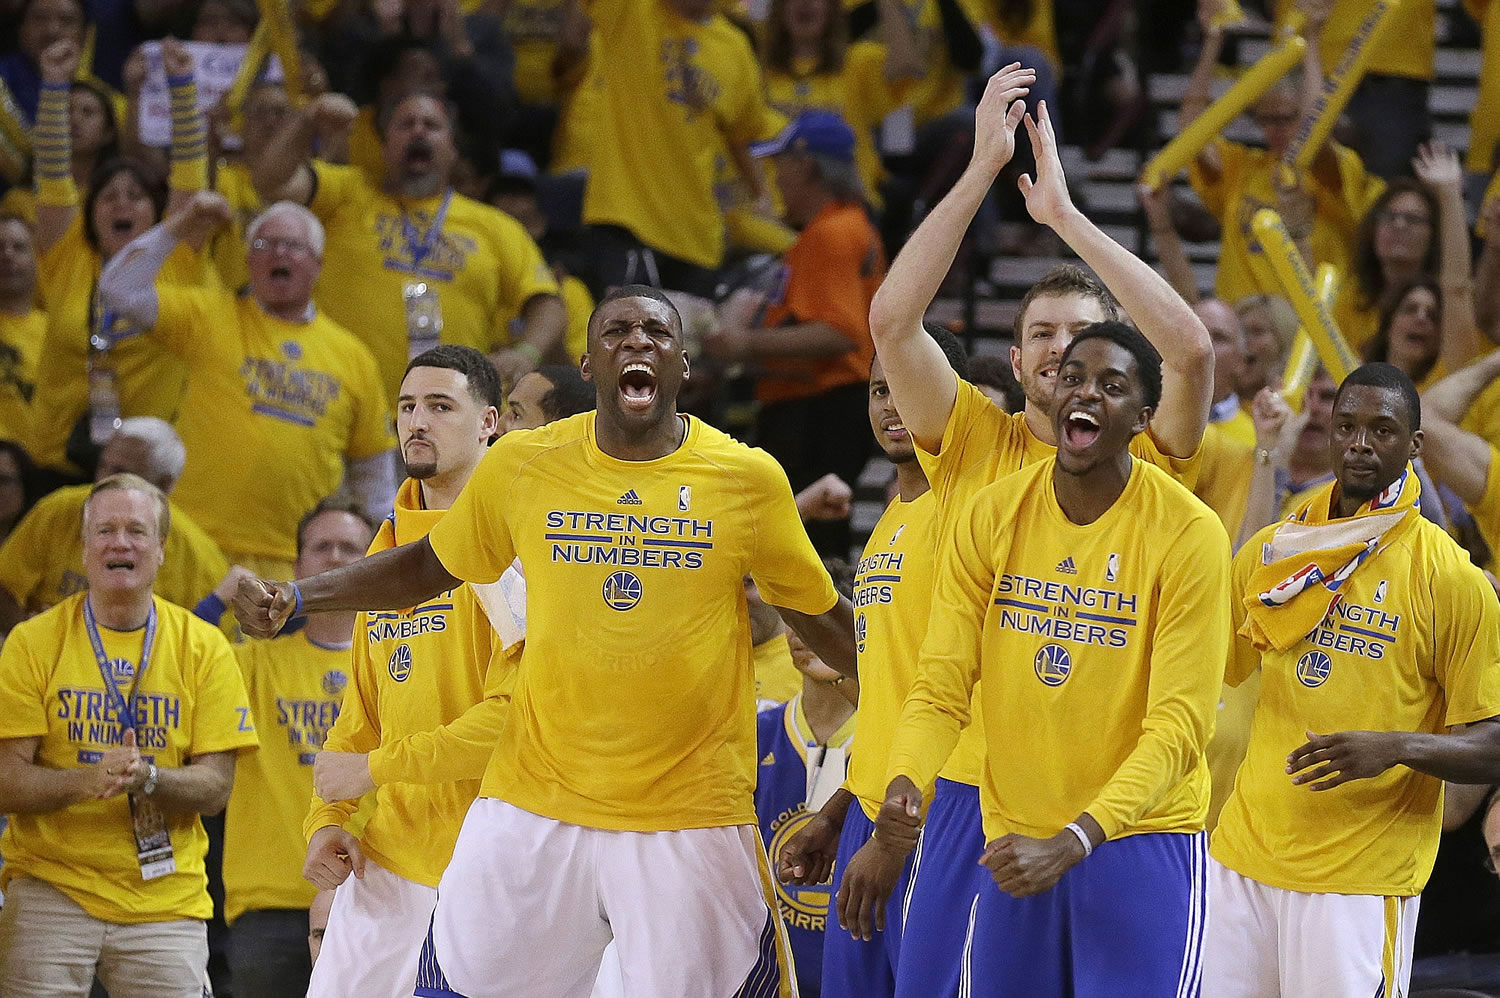 Golden State Warriors players react during the second half of Game 5 of the NBA basketball Western Conference finals against the Houston Rockets in Oakland, Calif., Wednesday, May 27, 2015.